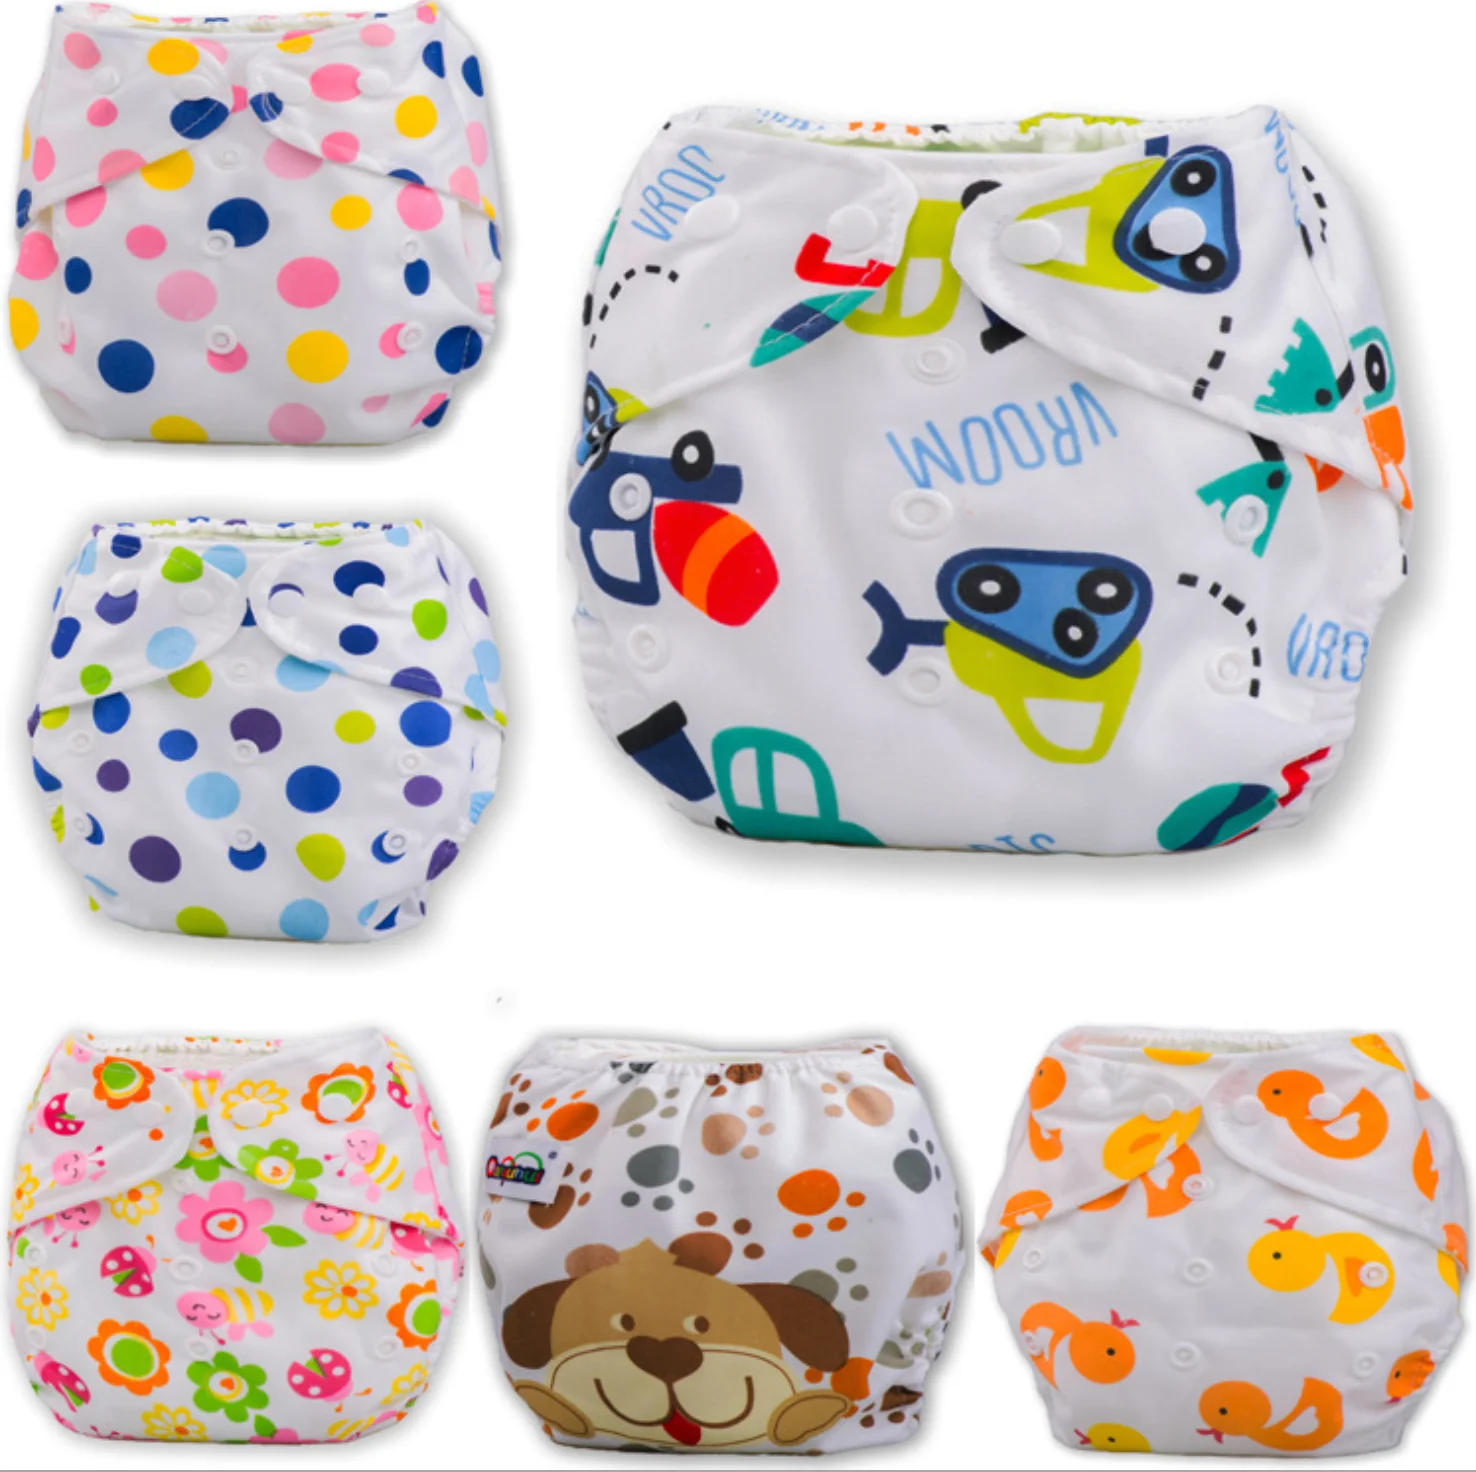 

Cloth Diapers Protect the Baby's Buttocks And Can be Washed. They Have Good air Permeability And Softness